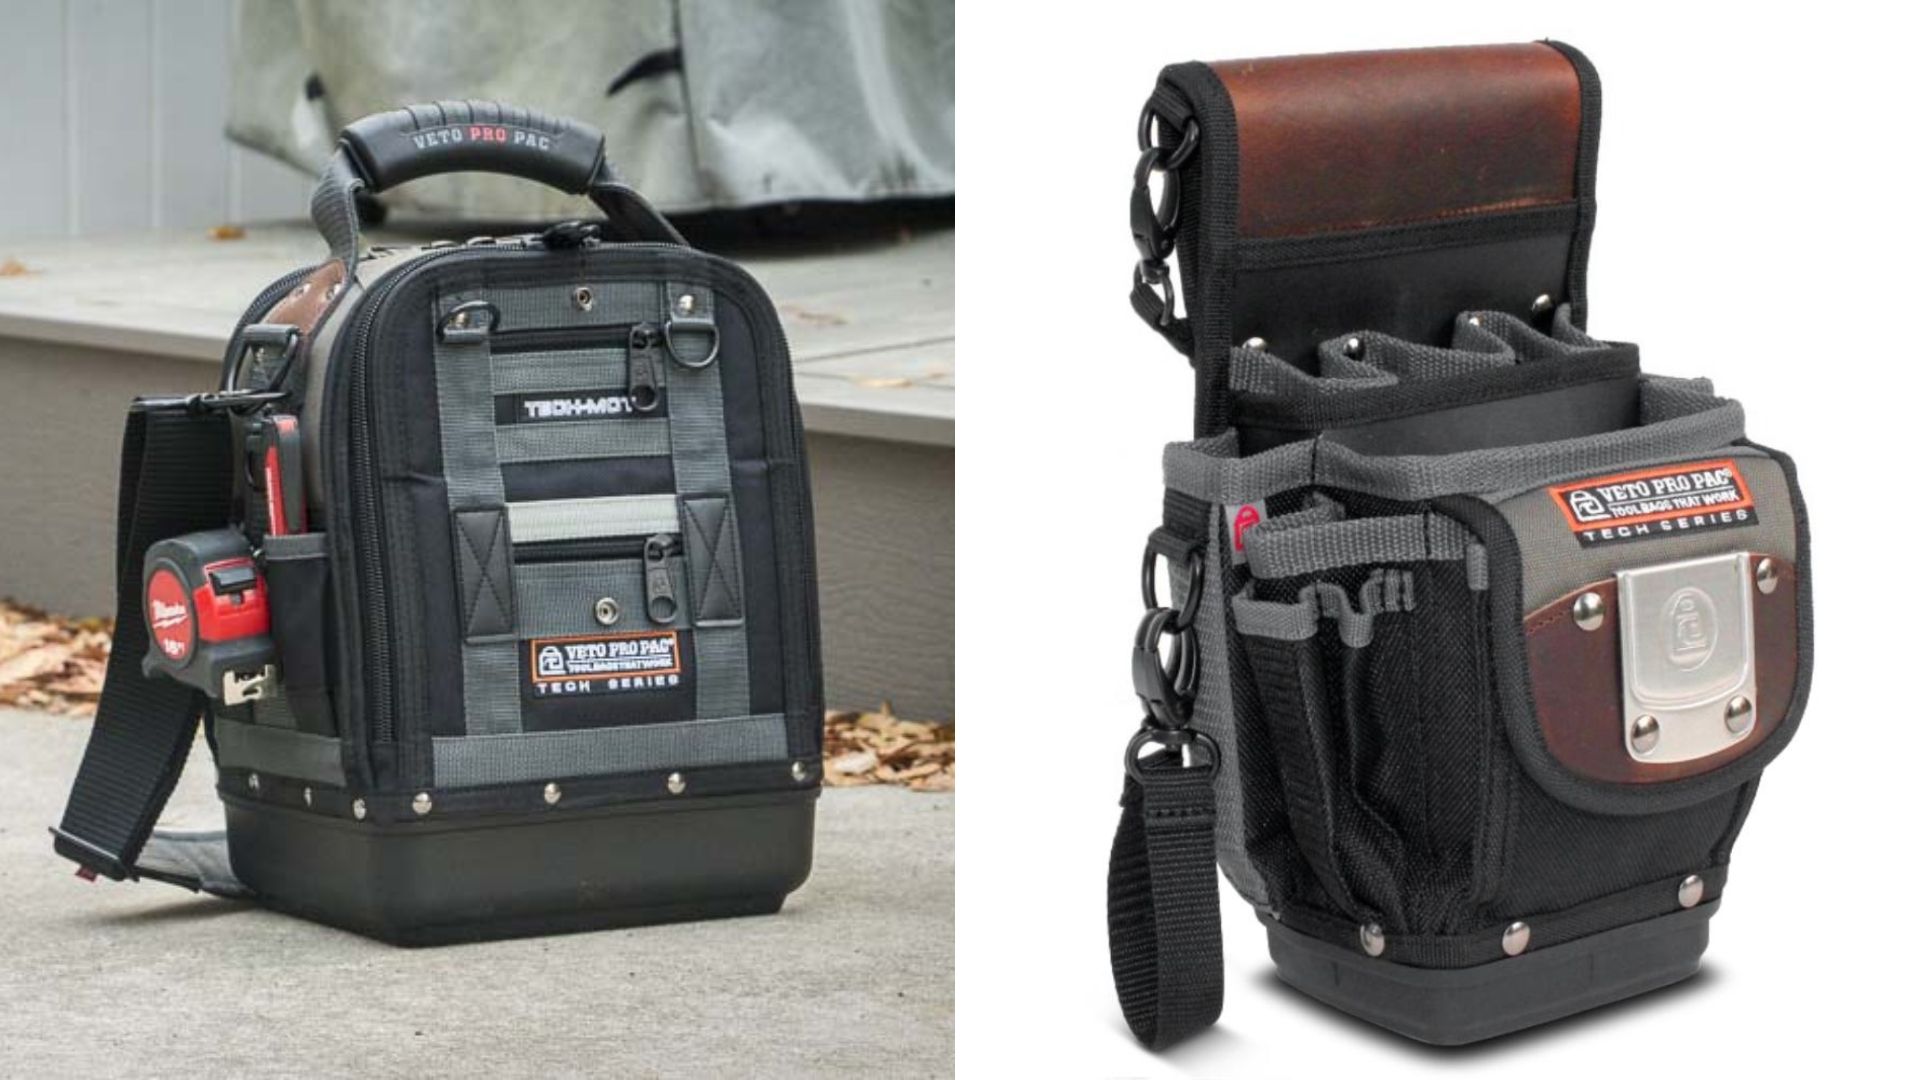 Two veto pro pac tool bags.